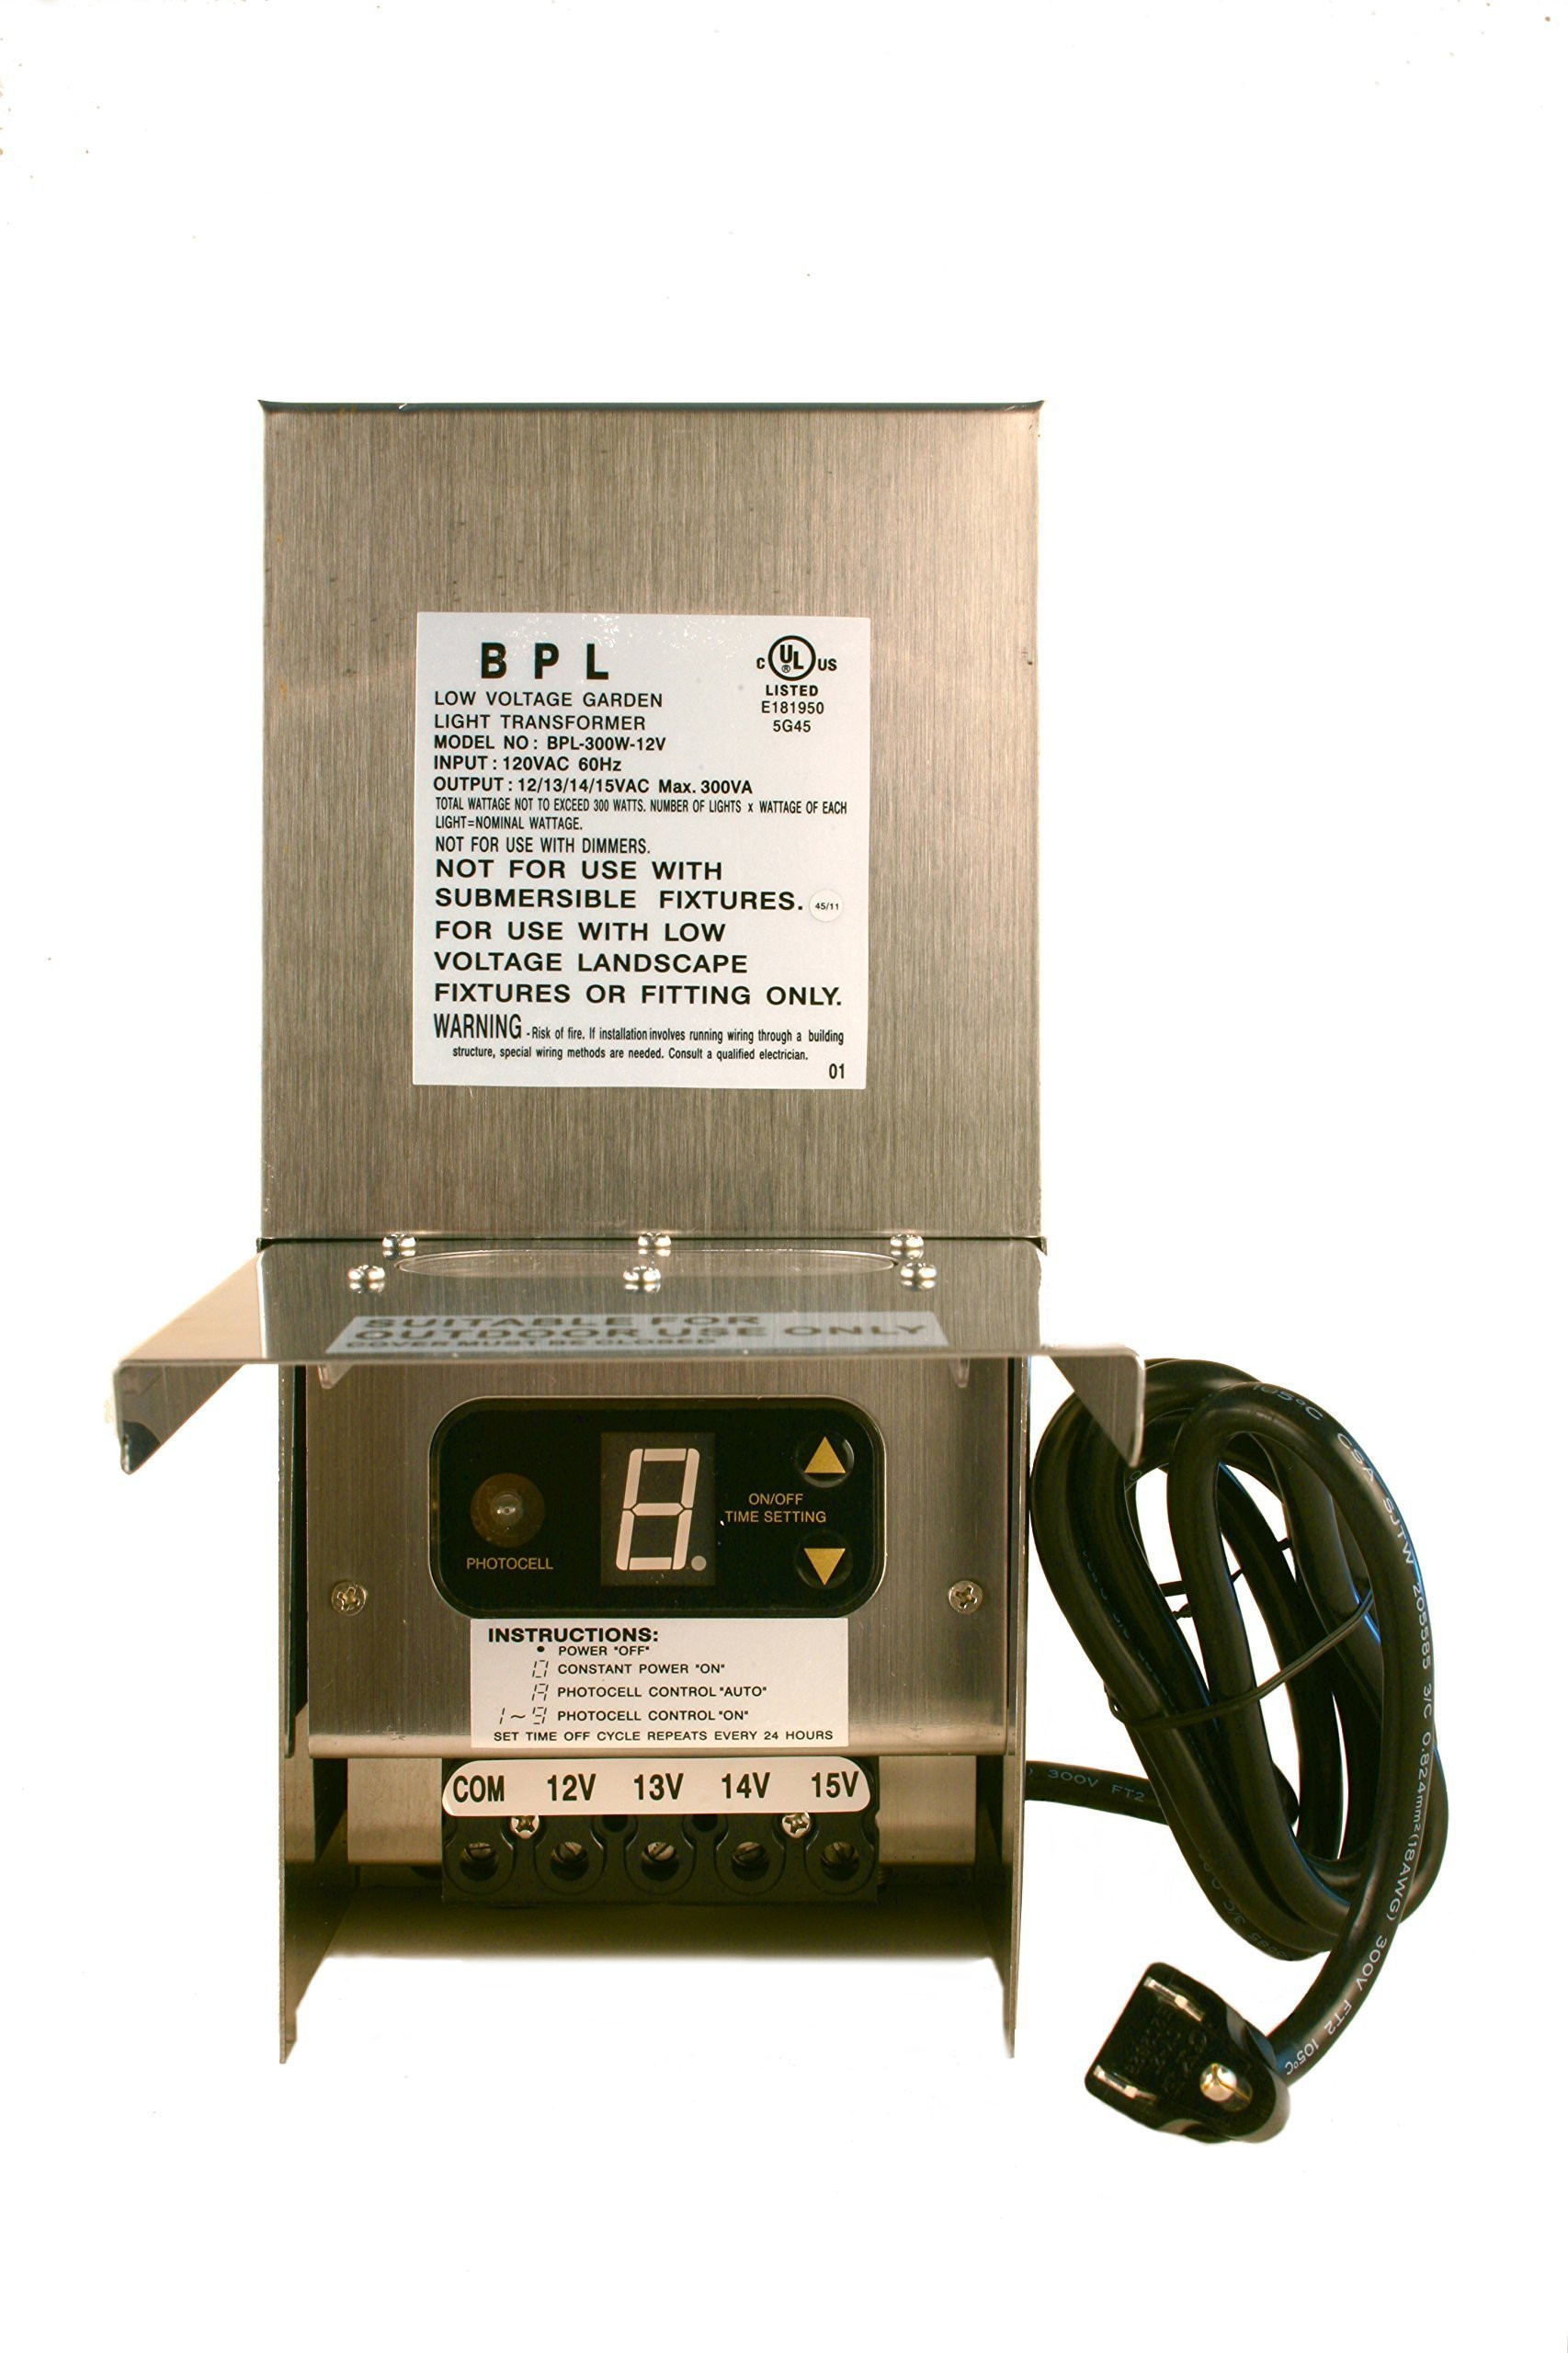 Landscape Lighting Transformer Reviews
 Best Rated in Outdoor Low Voltage Transformers & Helpful